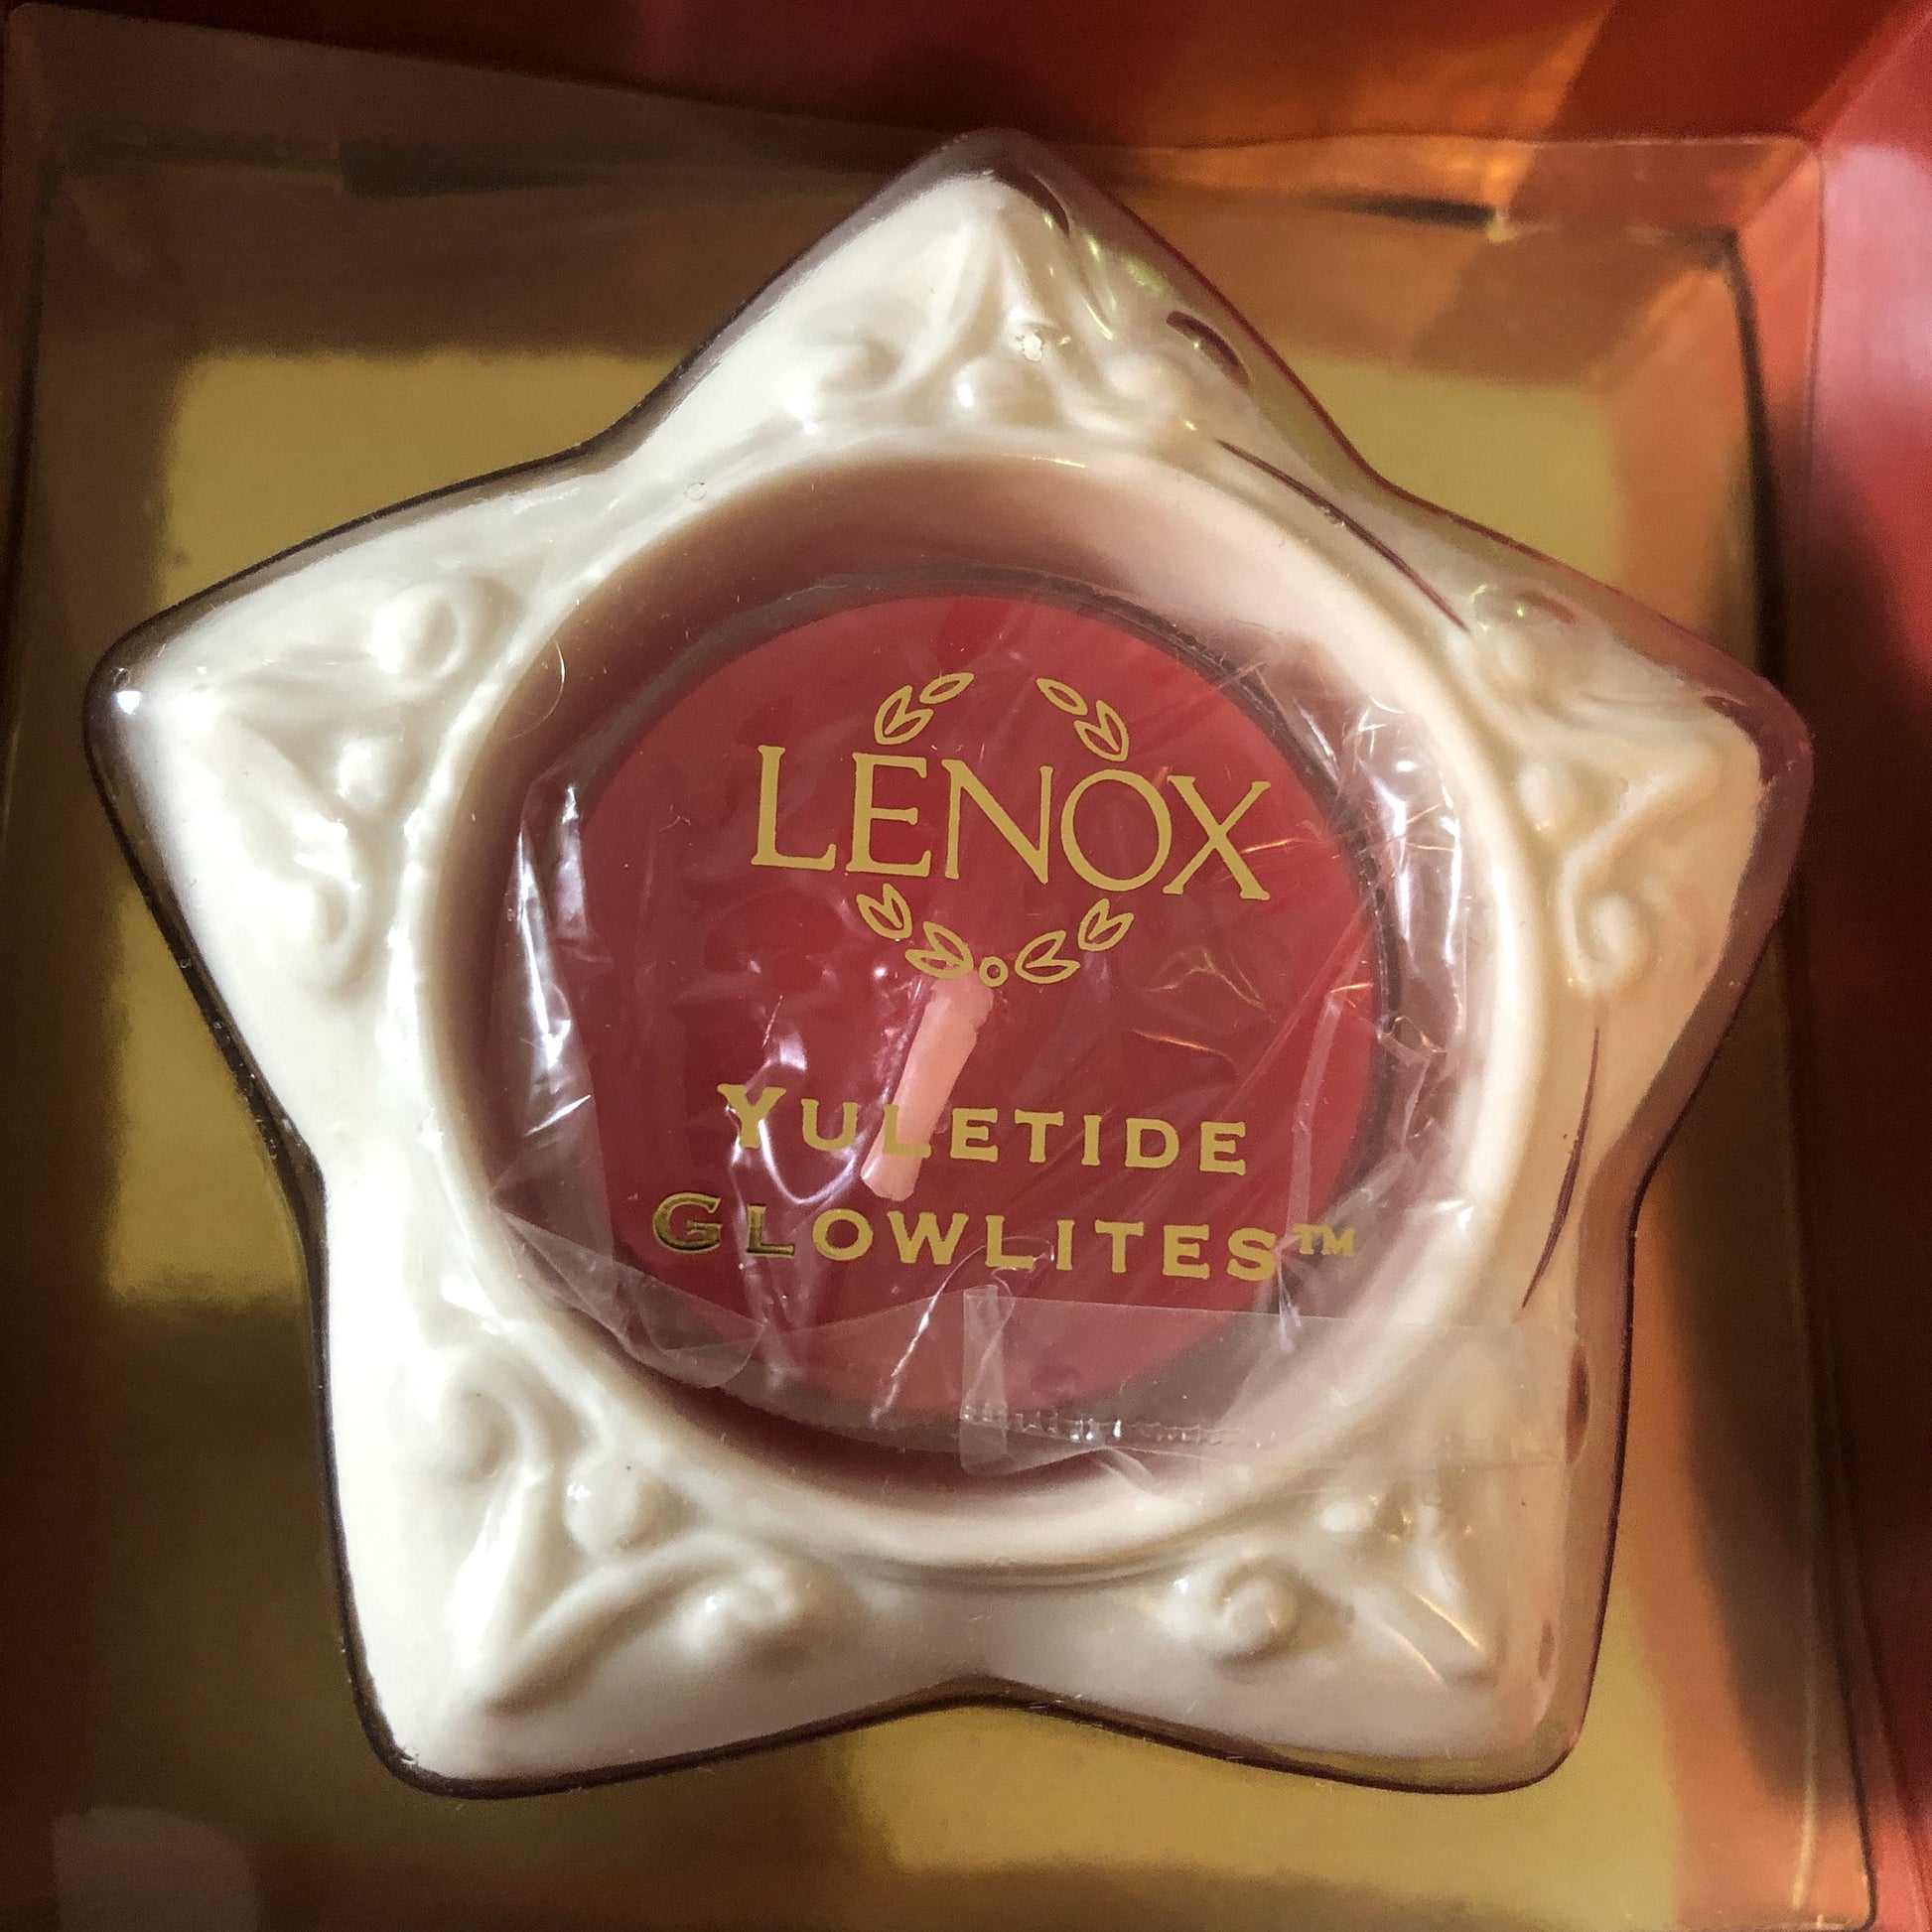 Heart and Star , Tea Lights, Lenox, Yuletide, Glowlites, 1/2 Inch Tea Light Candles Included